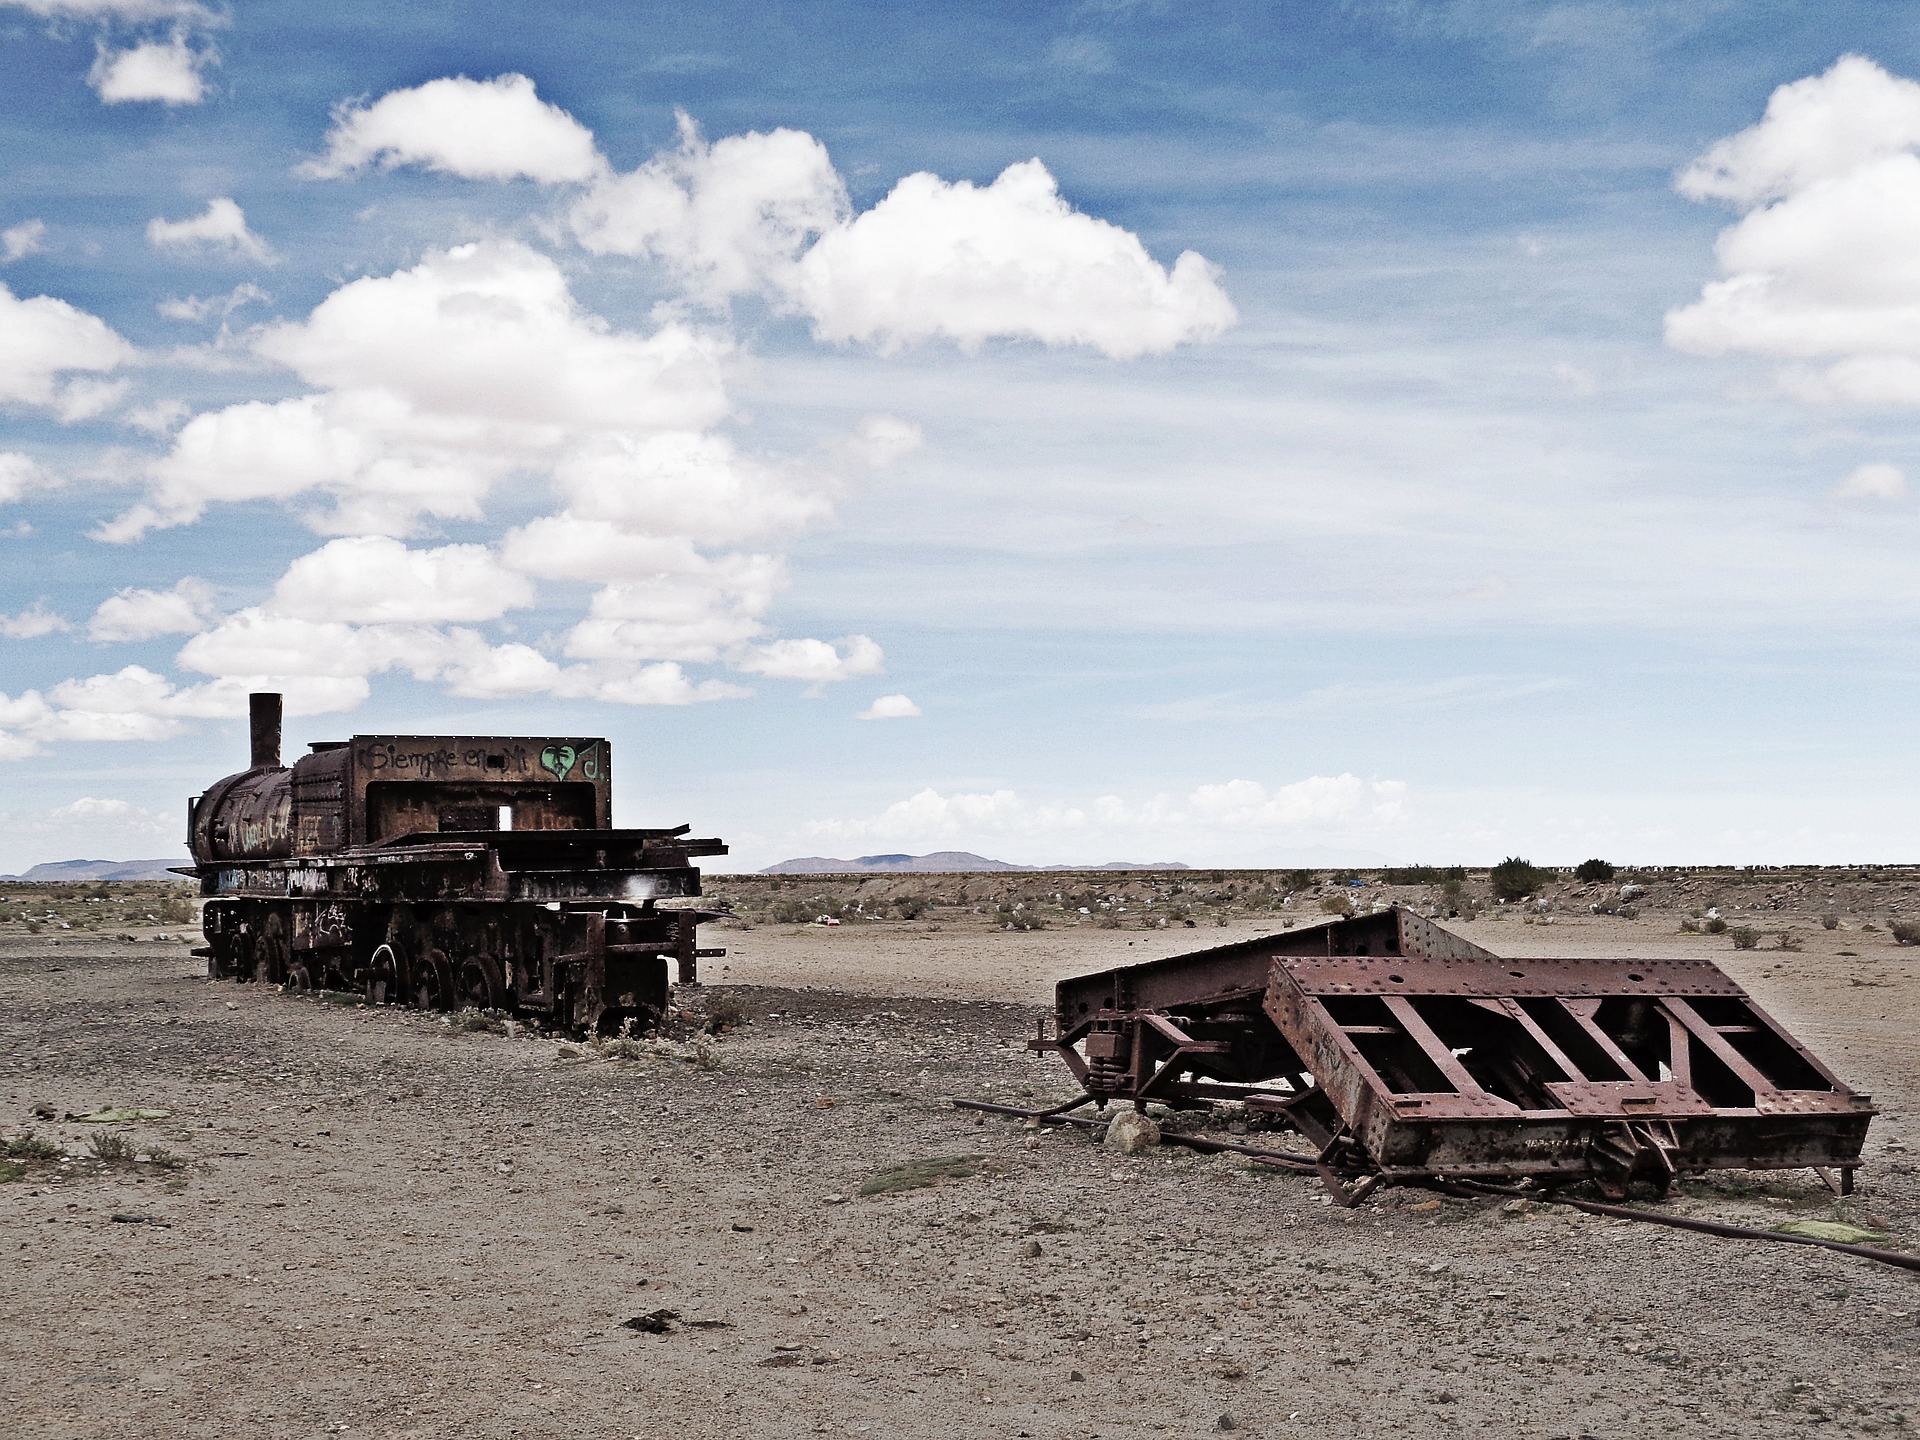 Abandoned train pieces in the desert.